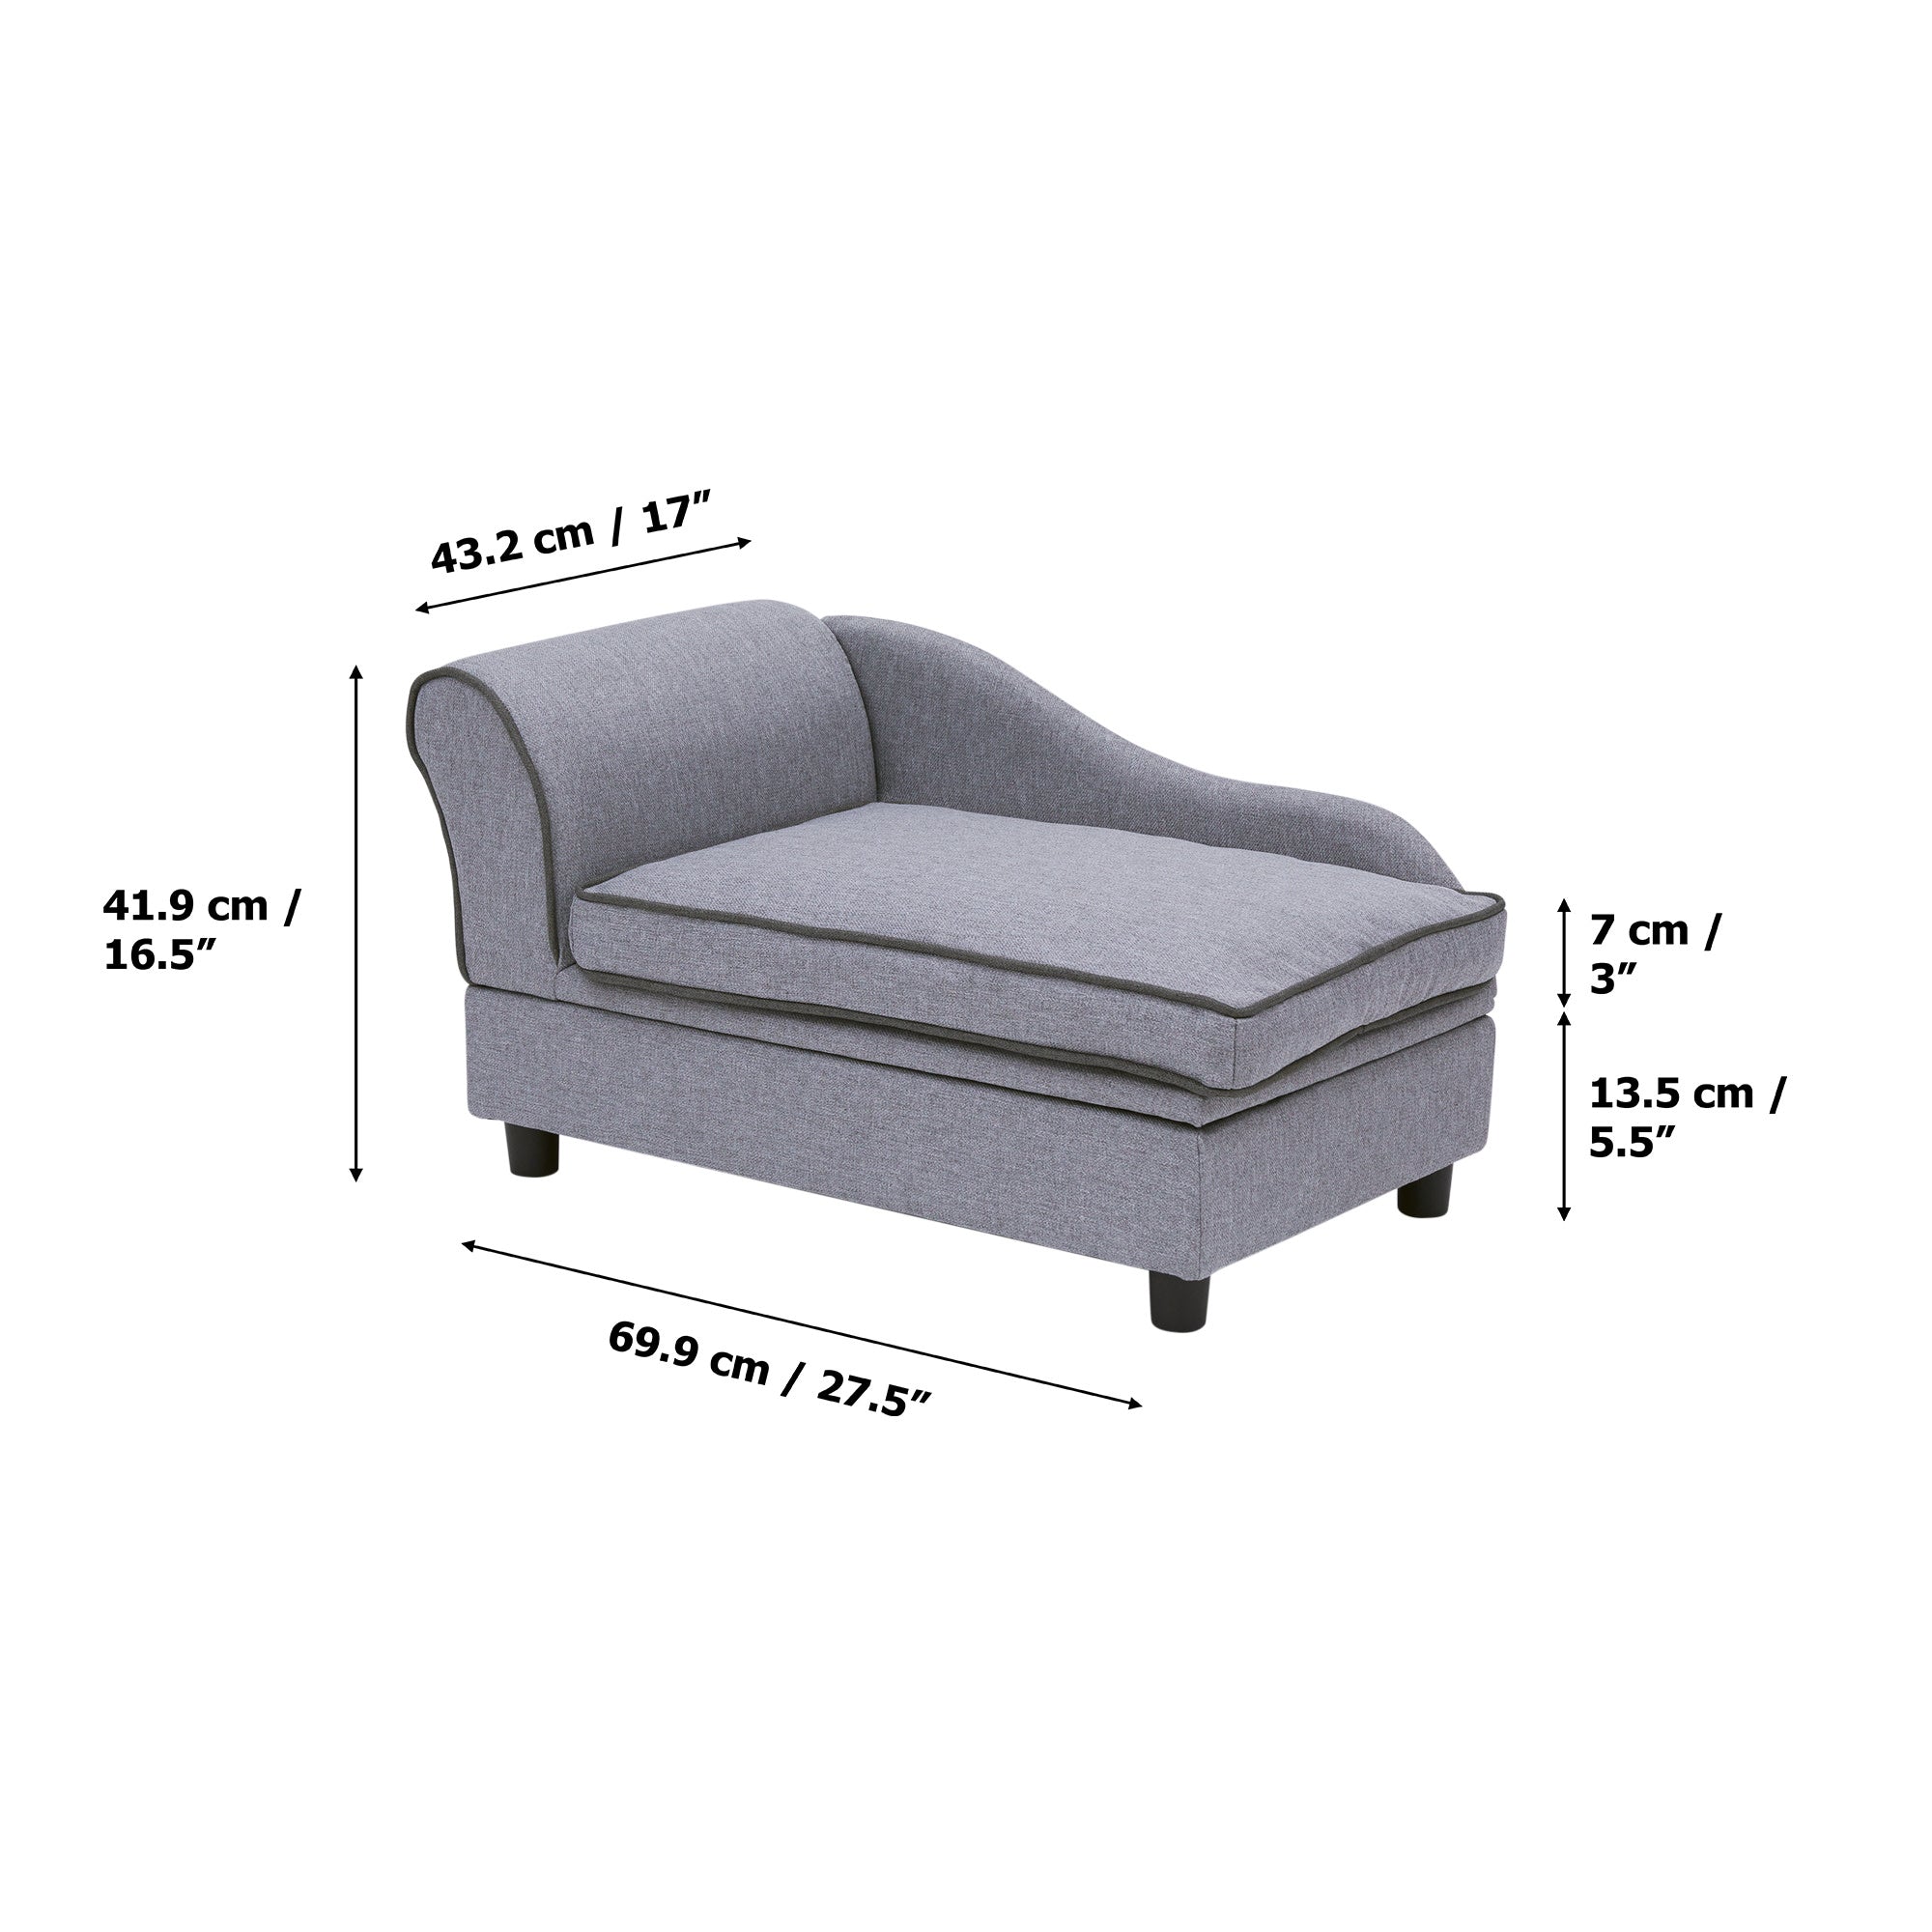 Teamson Pets Ivan Chaise Lounge Dog Bed with Storage for Cats & Small Dogs, Gray